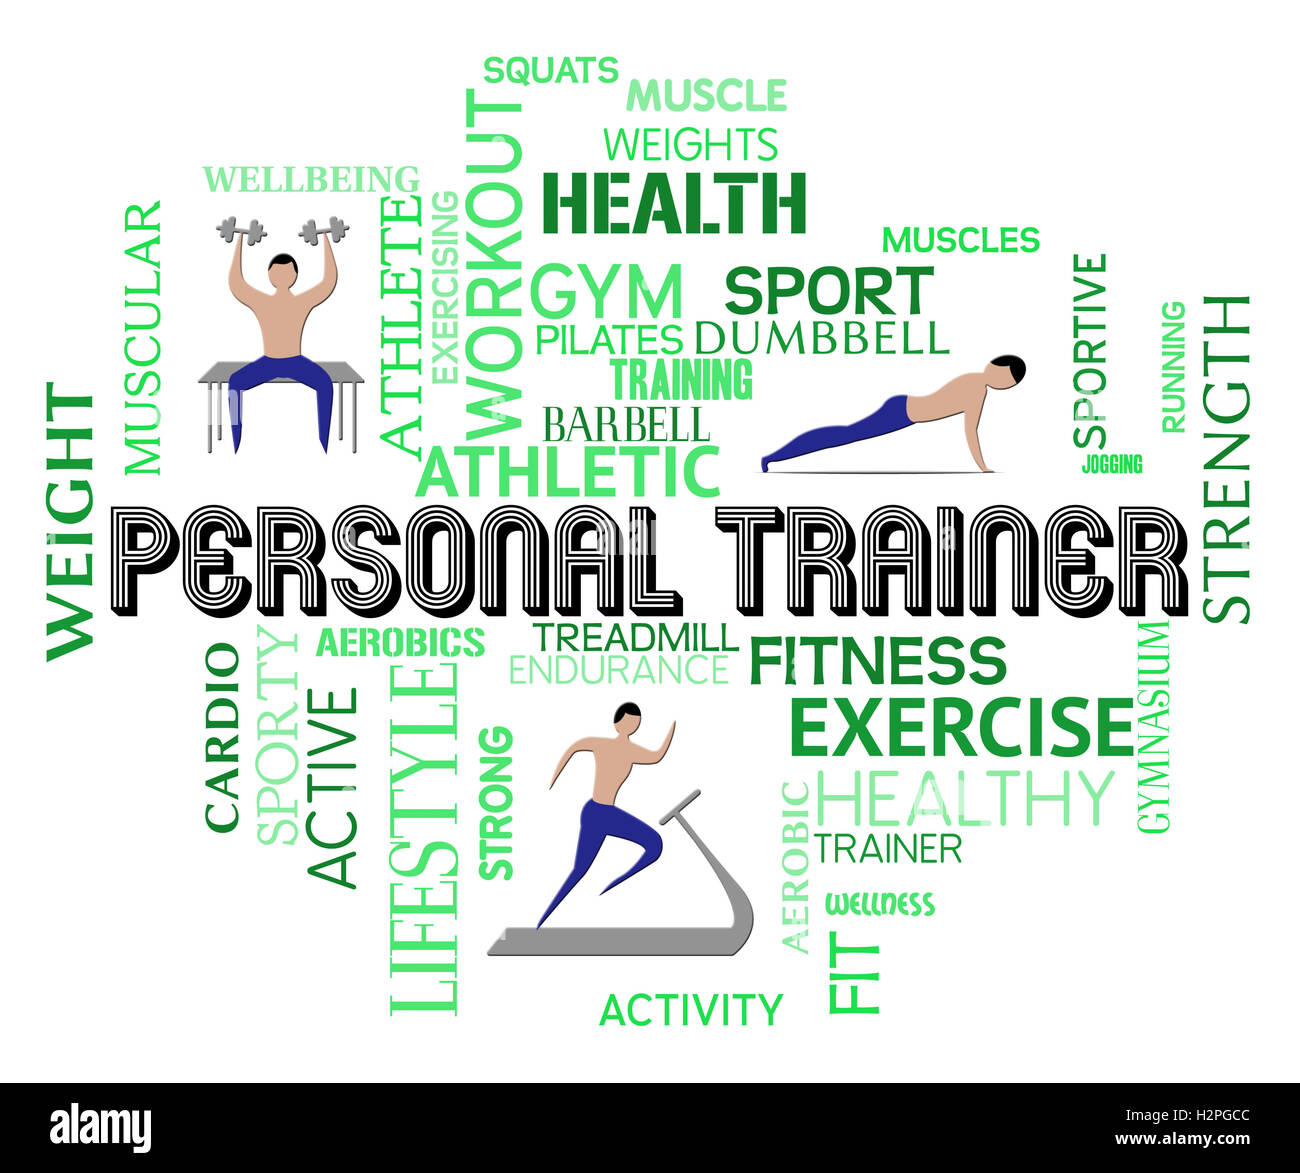 hetzelfde houd er rekening mee dat moersleutel Personal Trainer Meaning Physical Activity And Athletic Stock Photo - Alamy